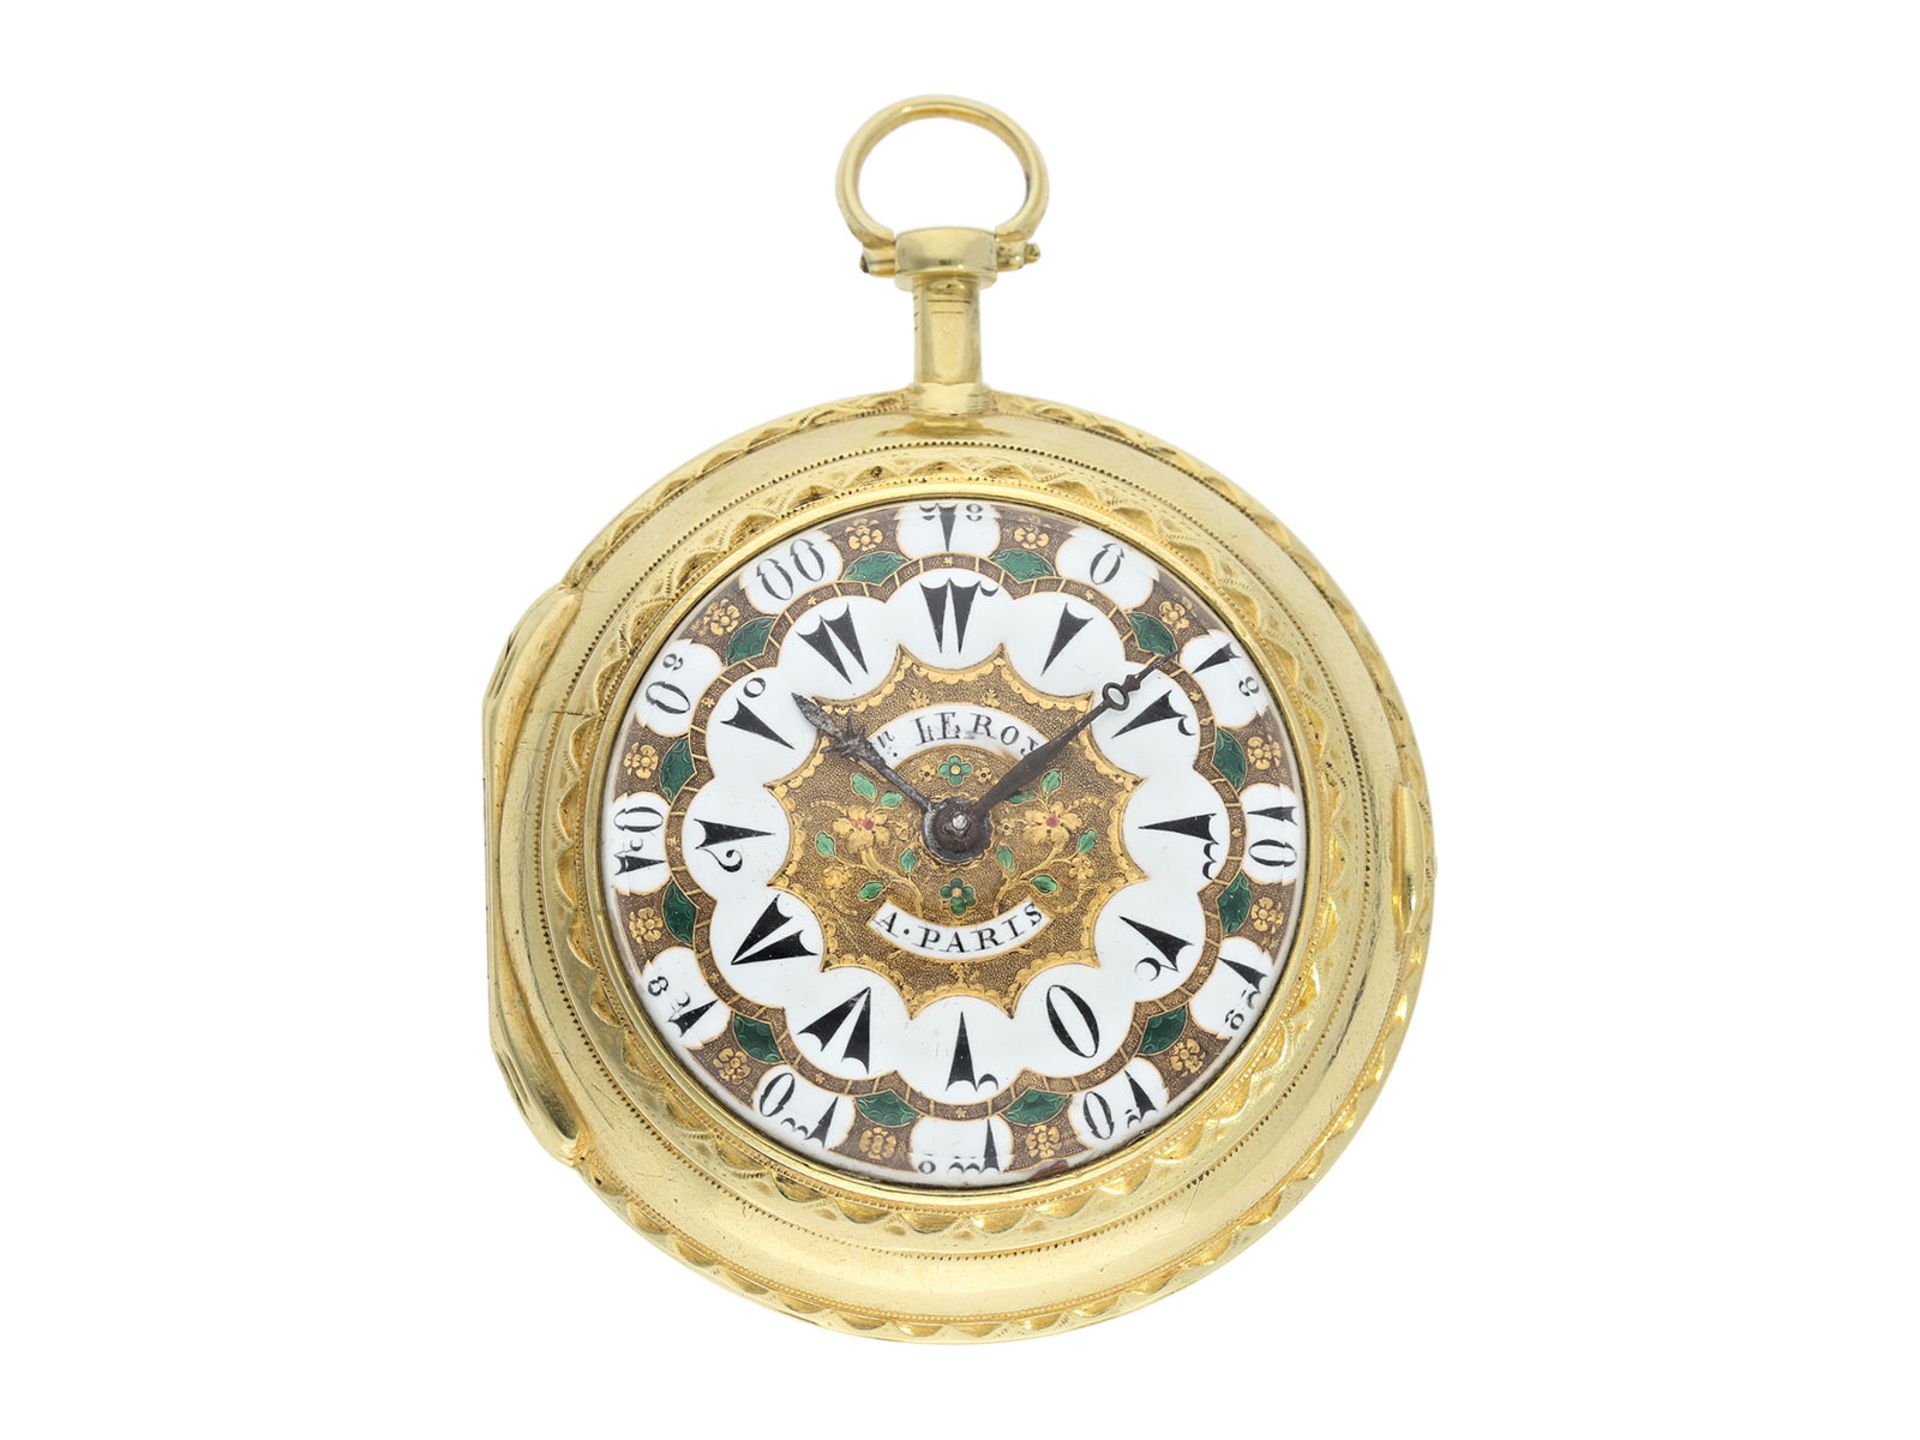 Pocket watch: exceptionally well preserved large verge watch for the Ottoman market, Royal